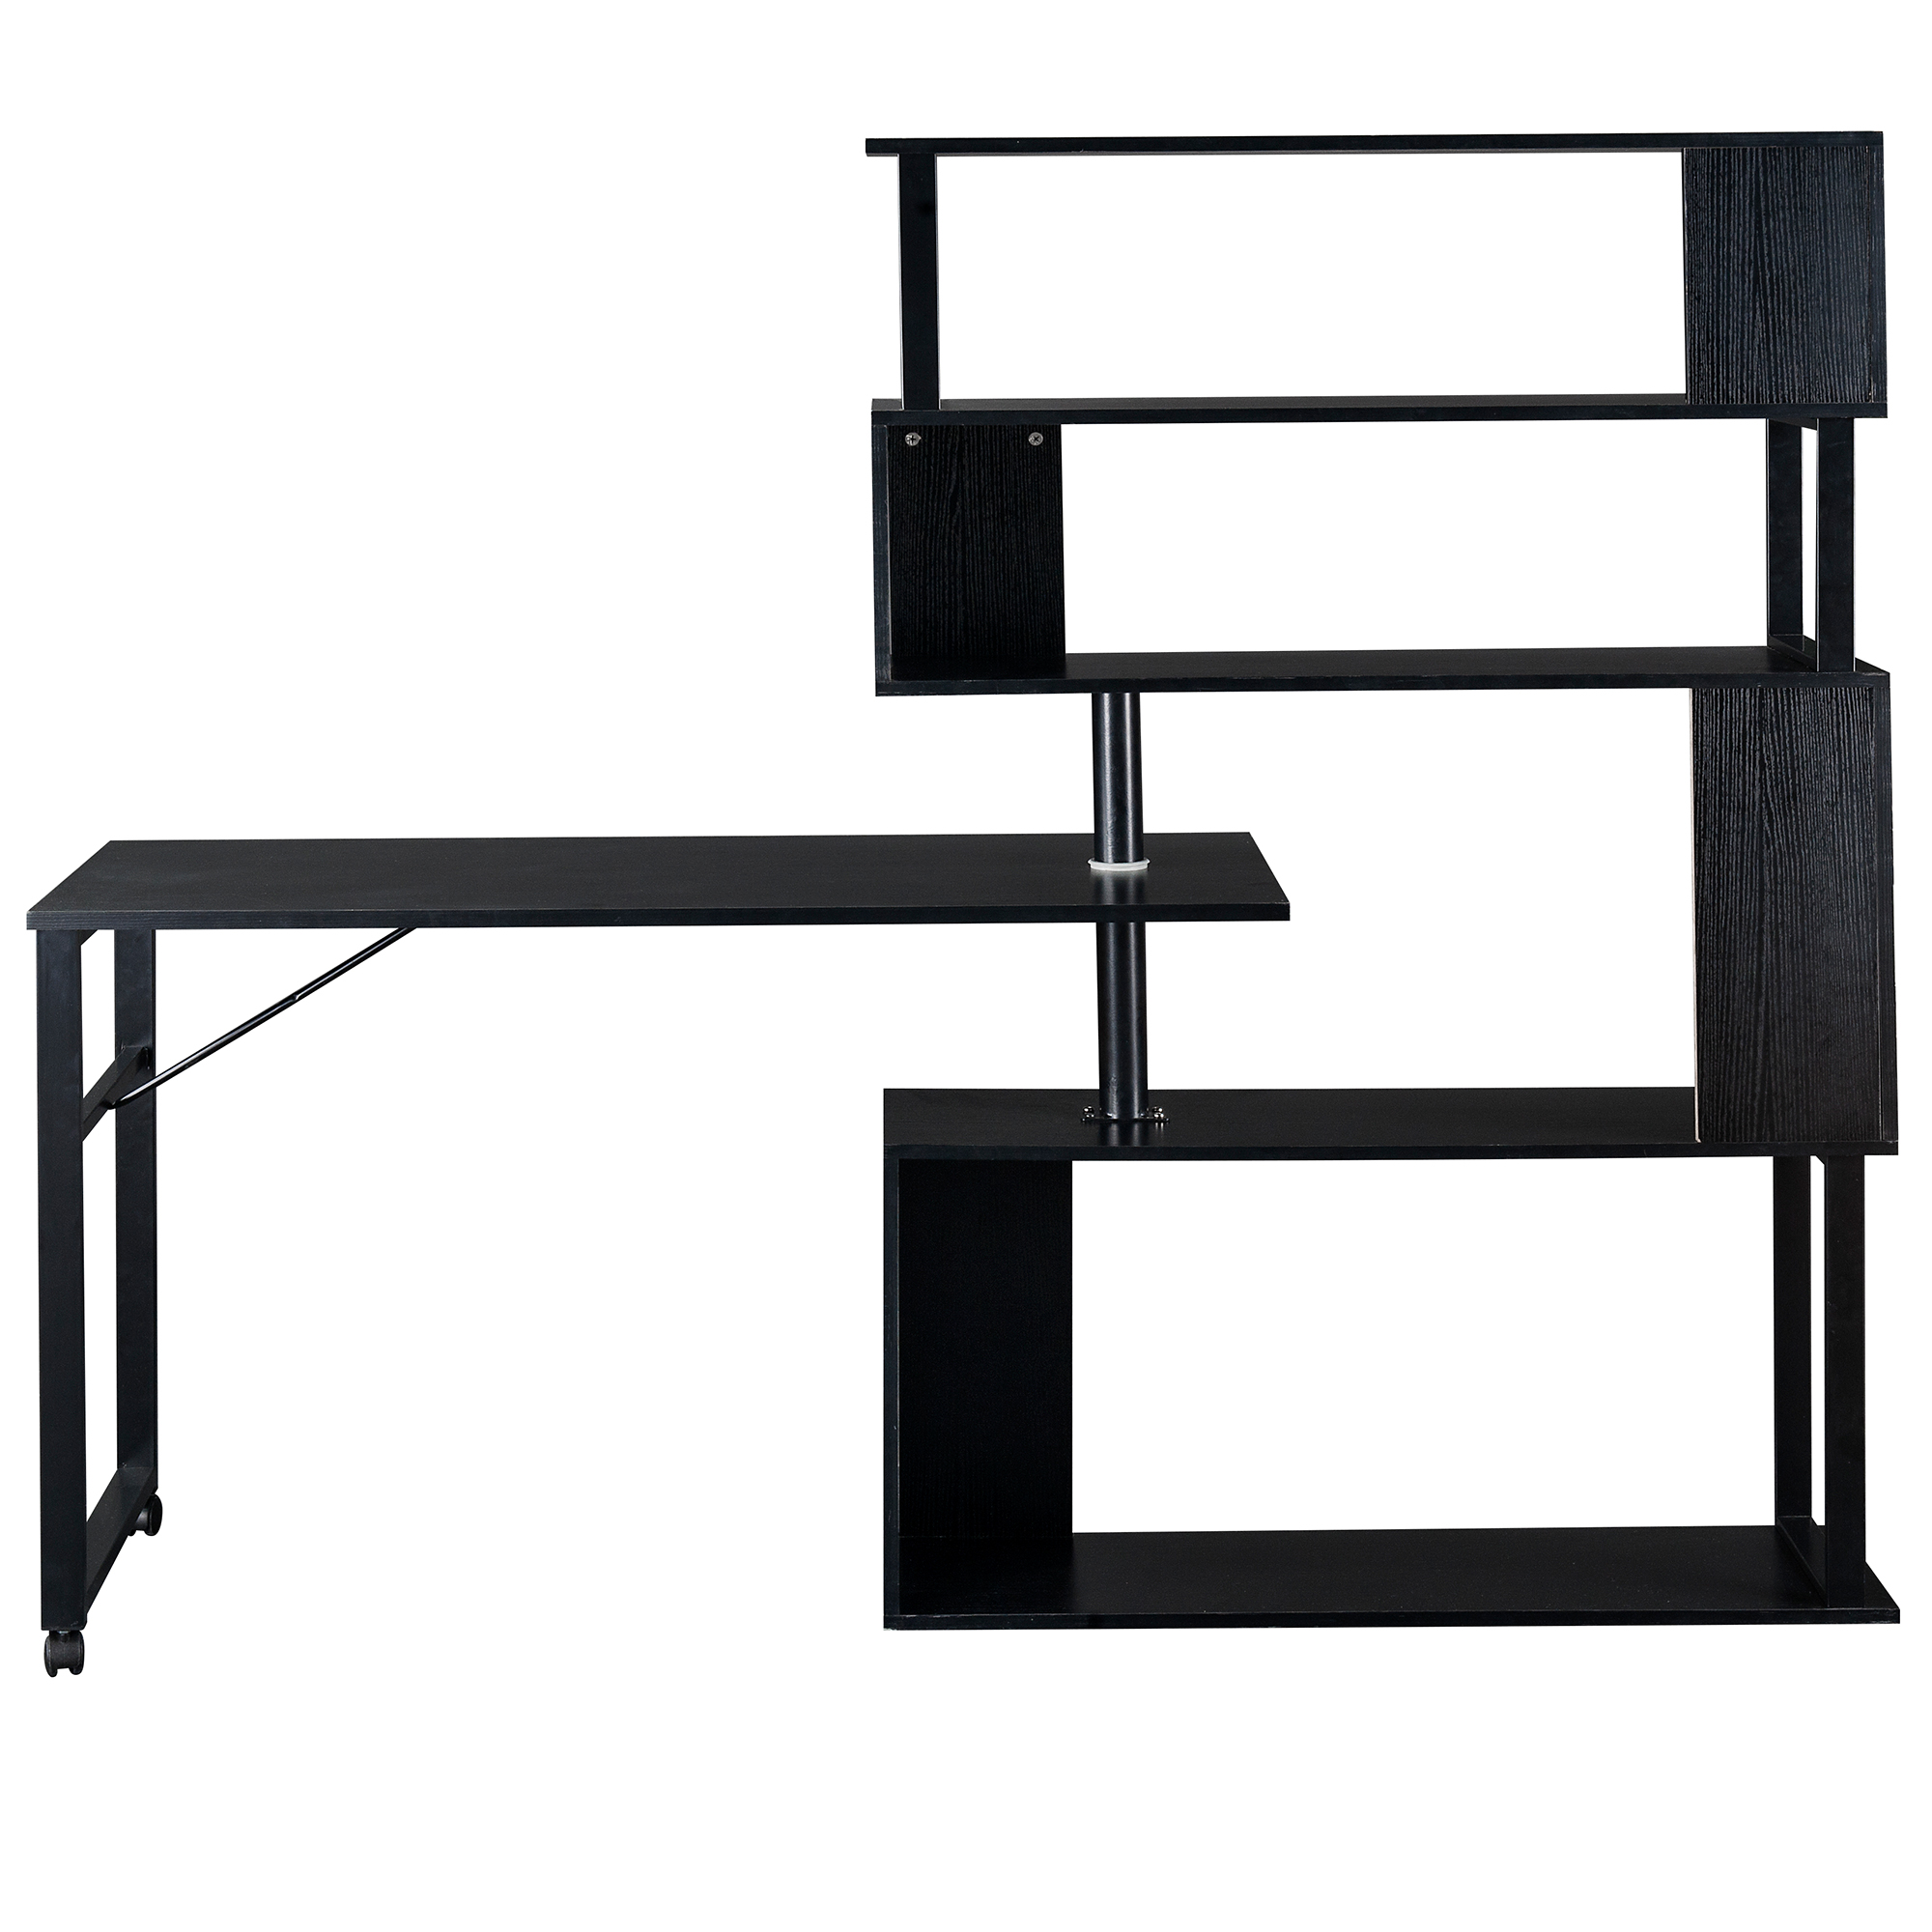 Home Office Rotating Computer Table With 5-Story Bookshelf - WF196079AAE